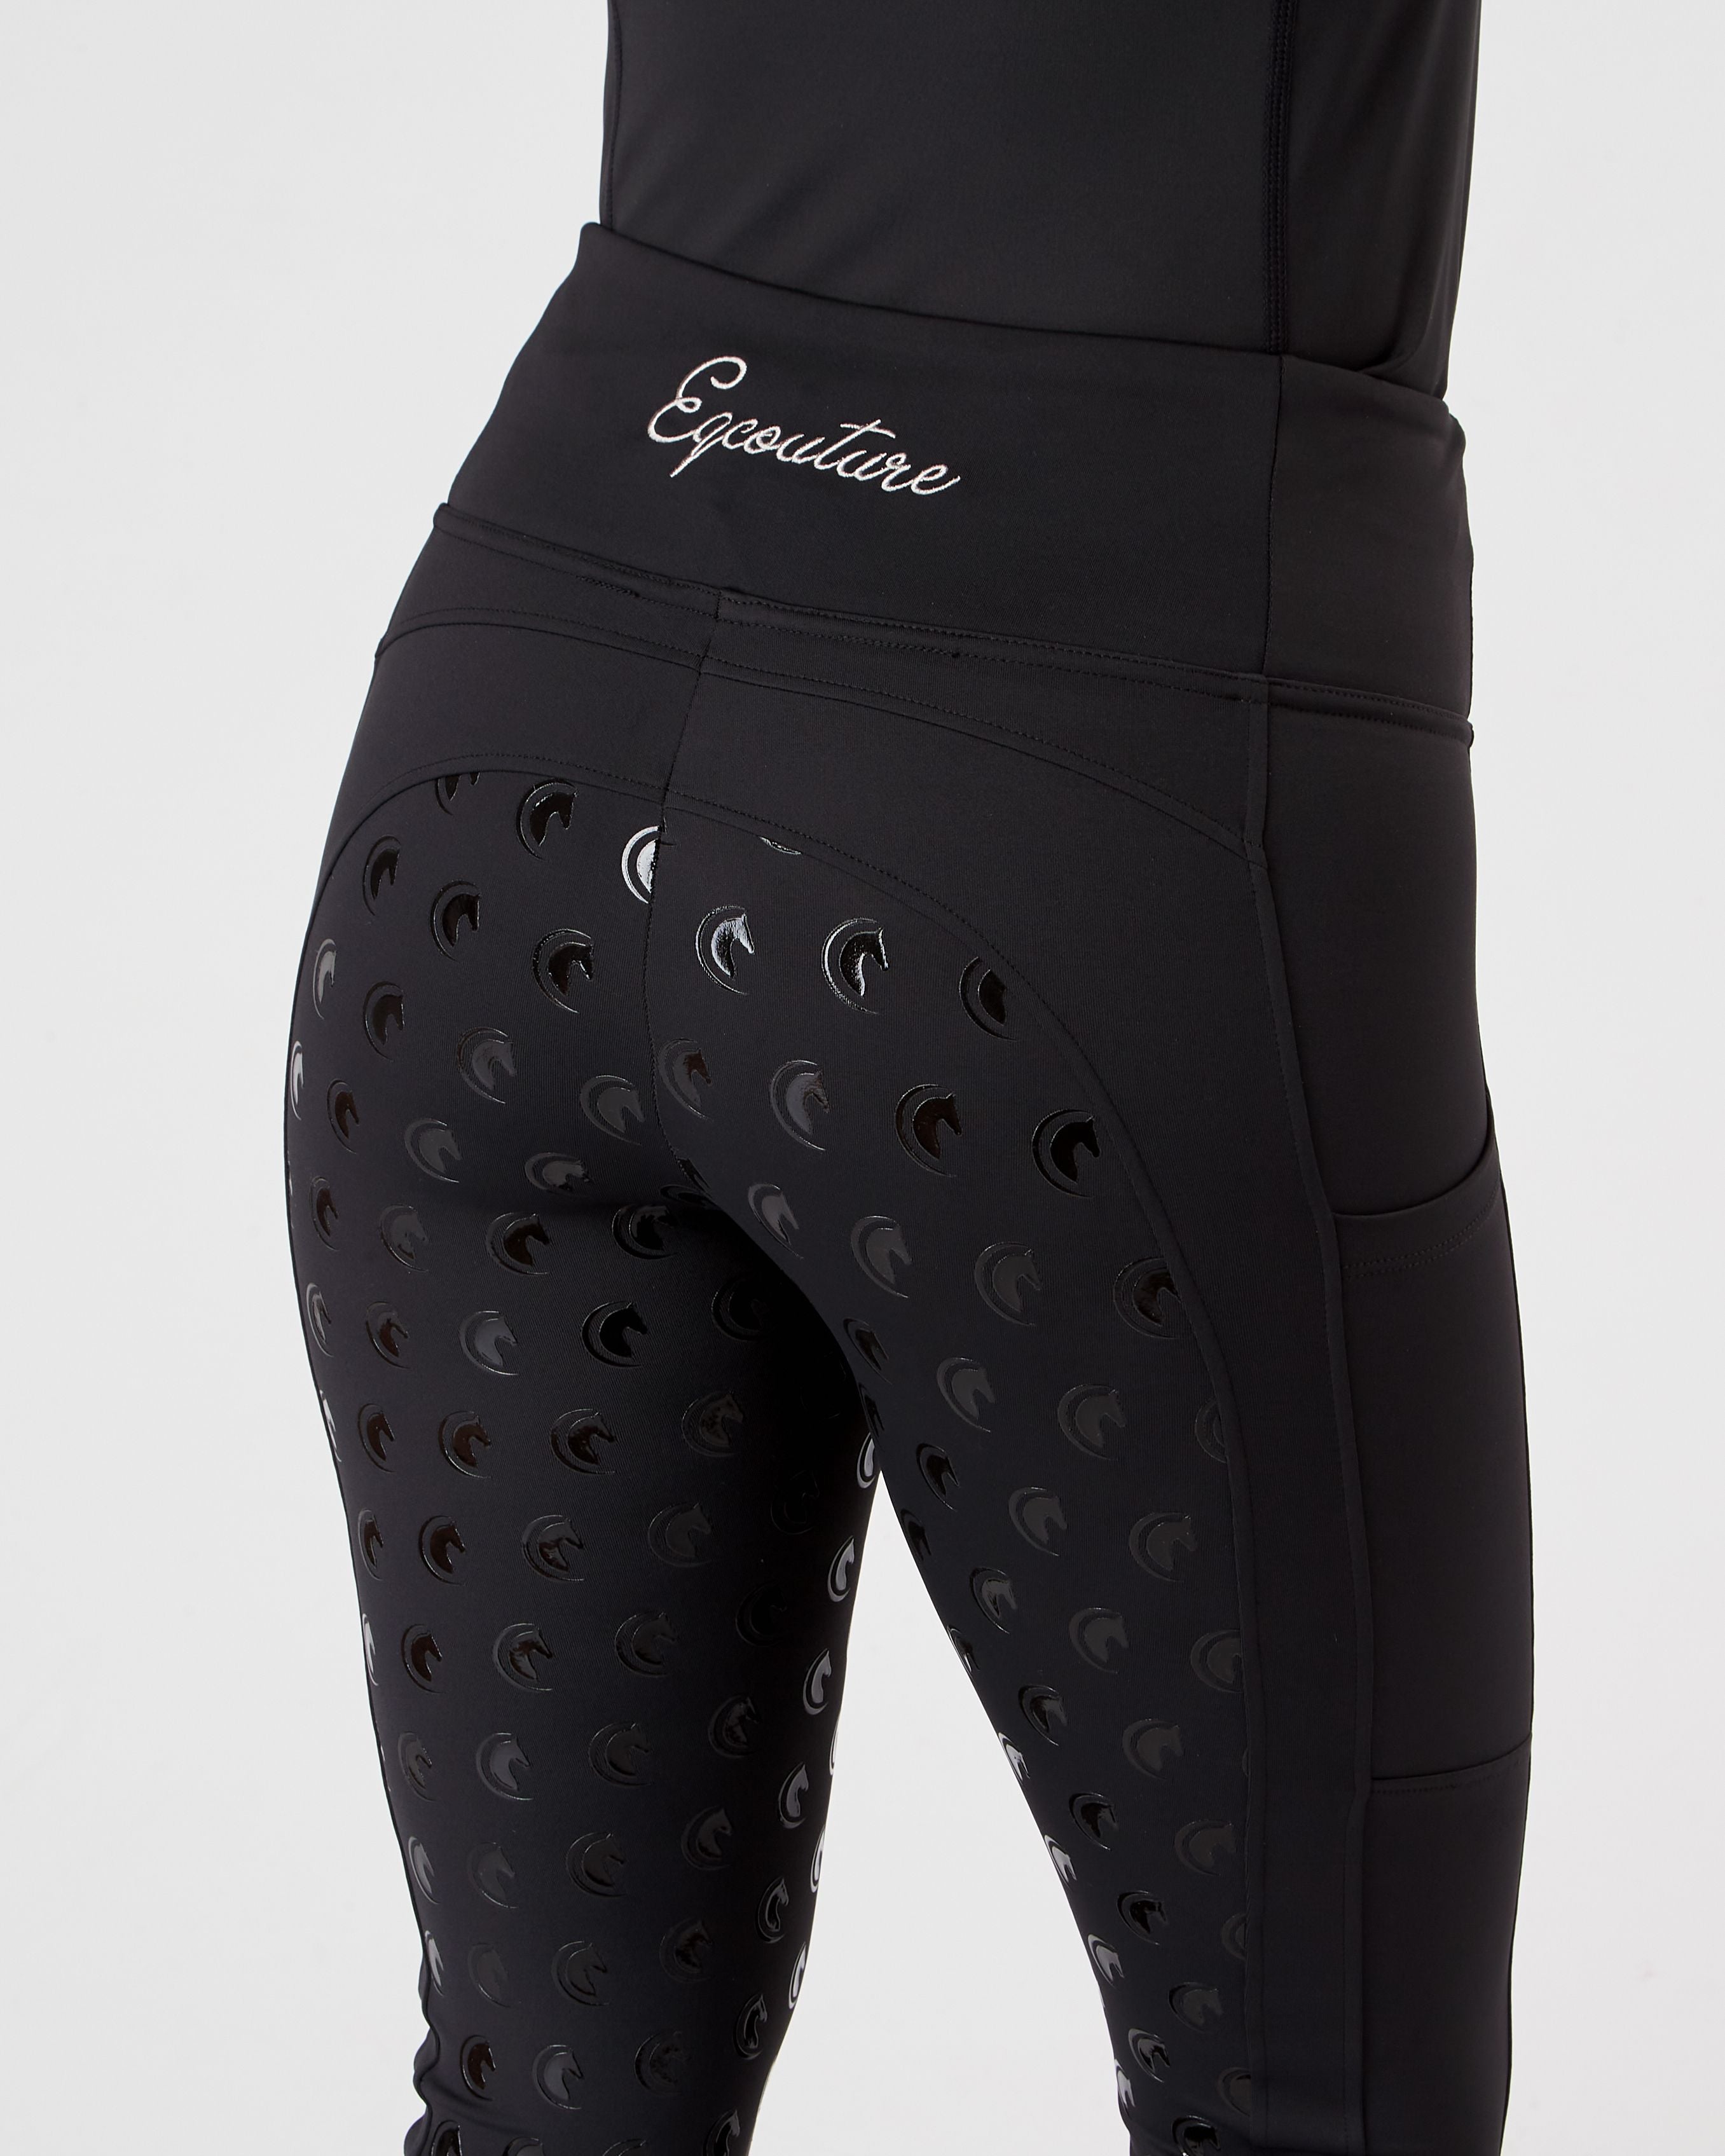 WINTER Thermal Black Riding Leggings / Tights with Phone Pockets - WATER RESISTANT